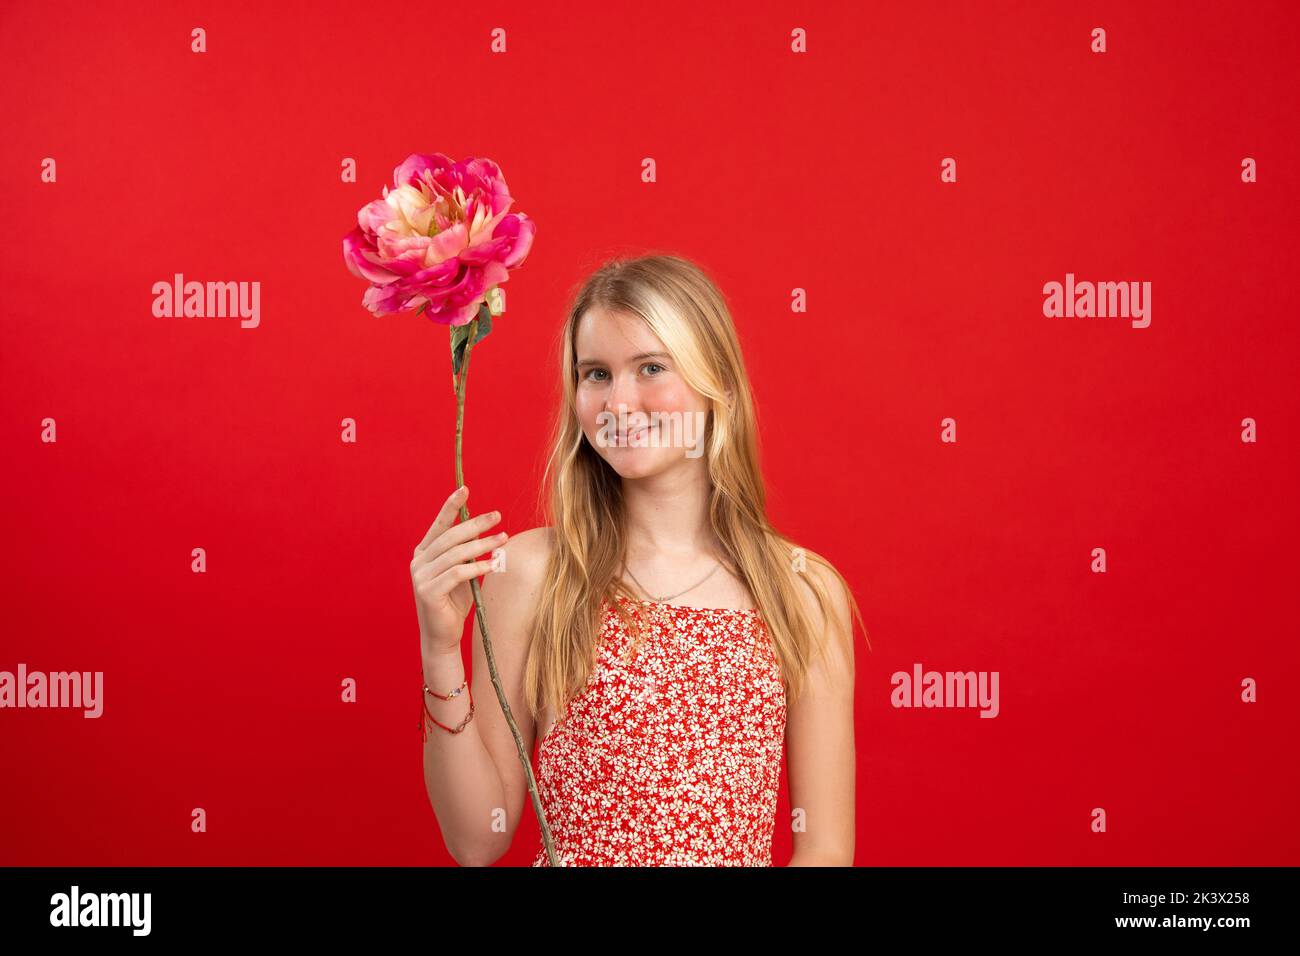 Portrait of cheerful amazing teenage girl with fair hair holding raising hand with flower pink peony on red background. Stock Photo